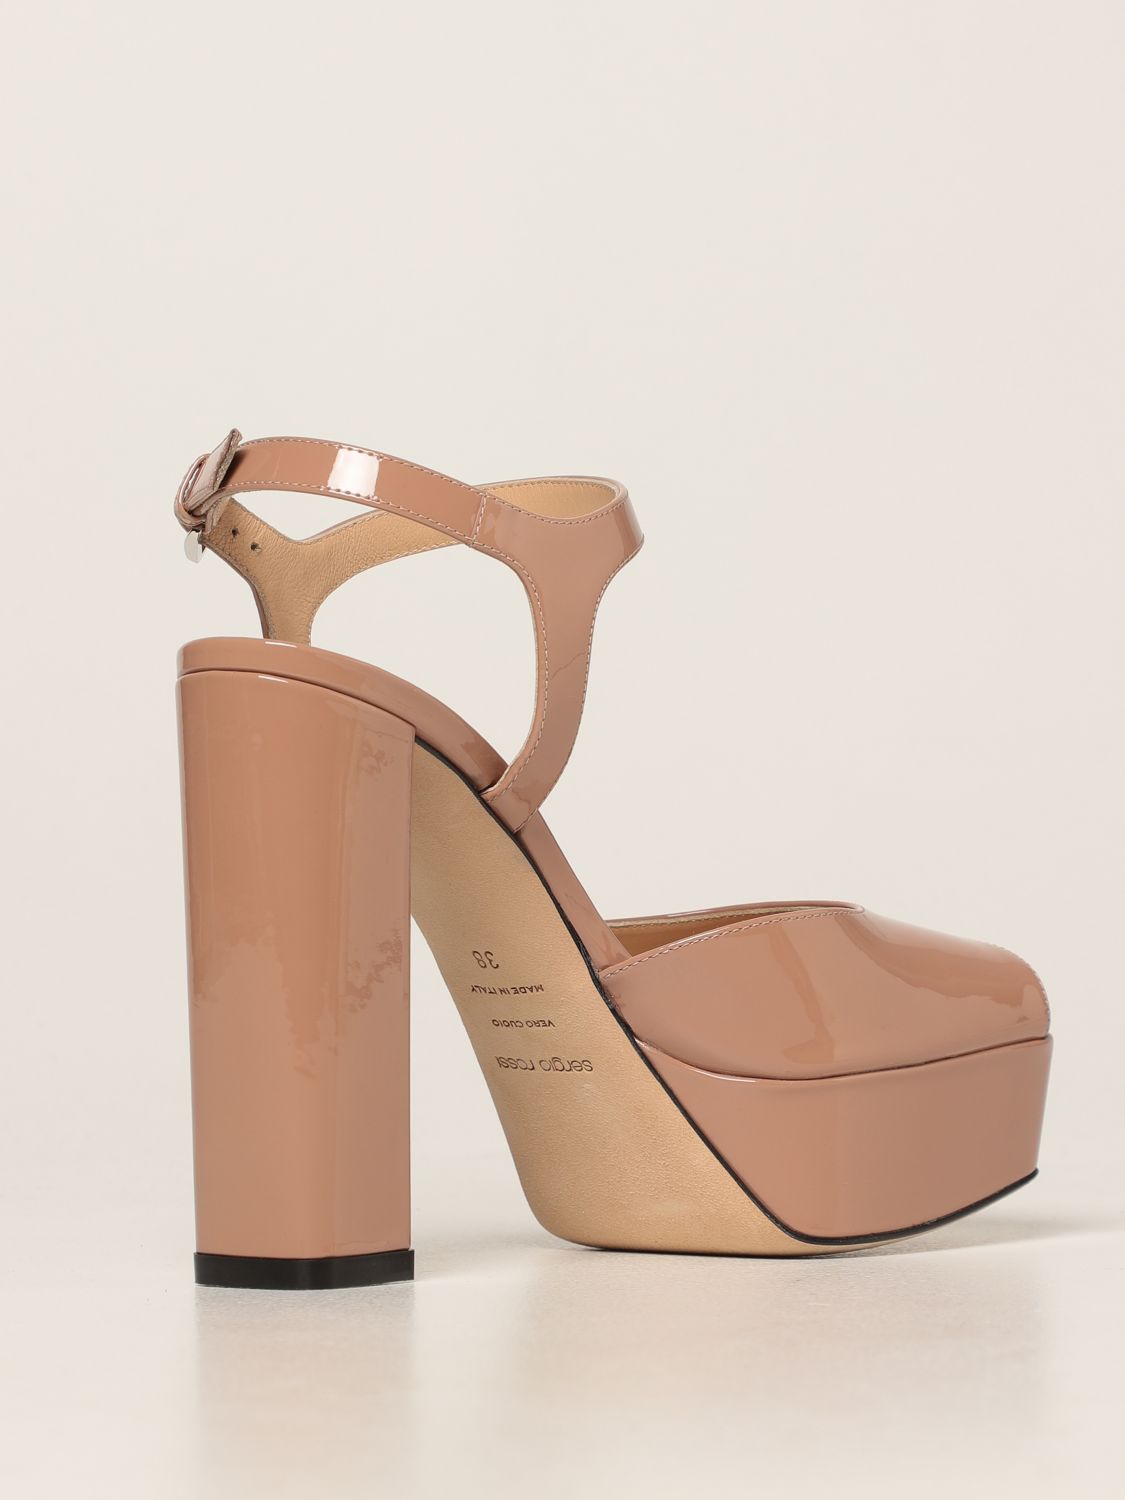 Heeled sandals Sergio Rossi: Sergio Rossi patent leather sandal blush pink 3